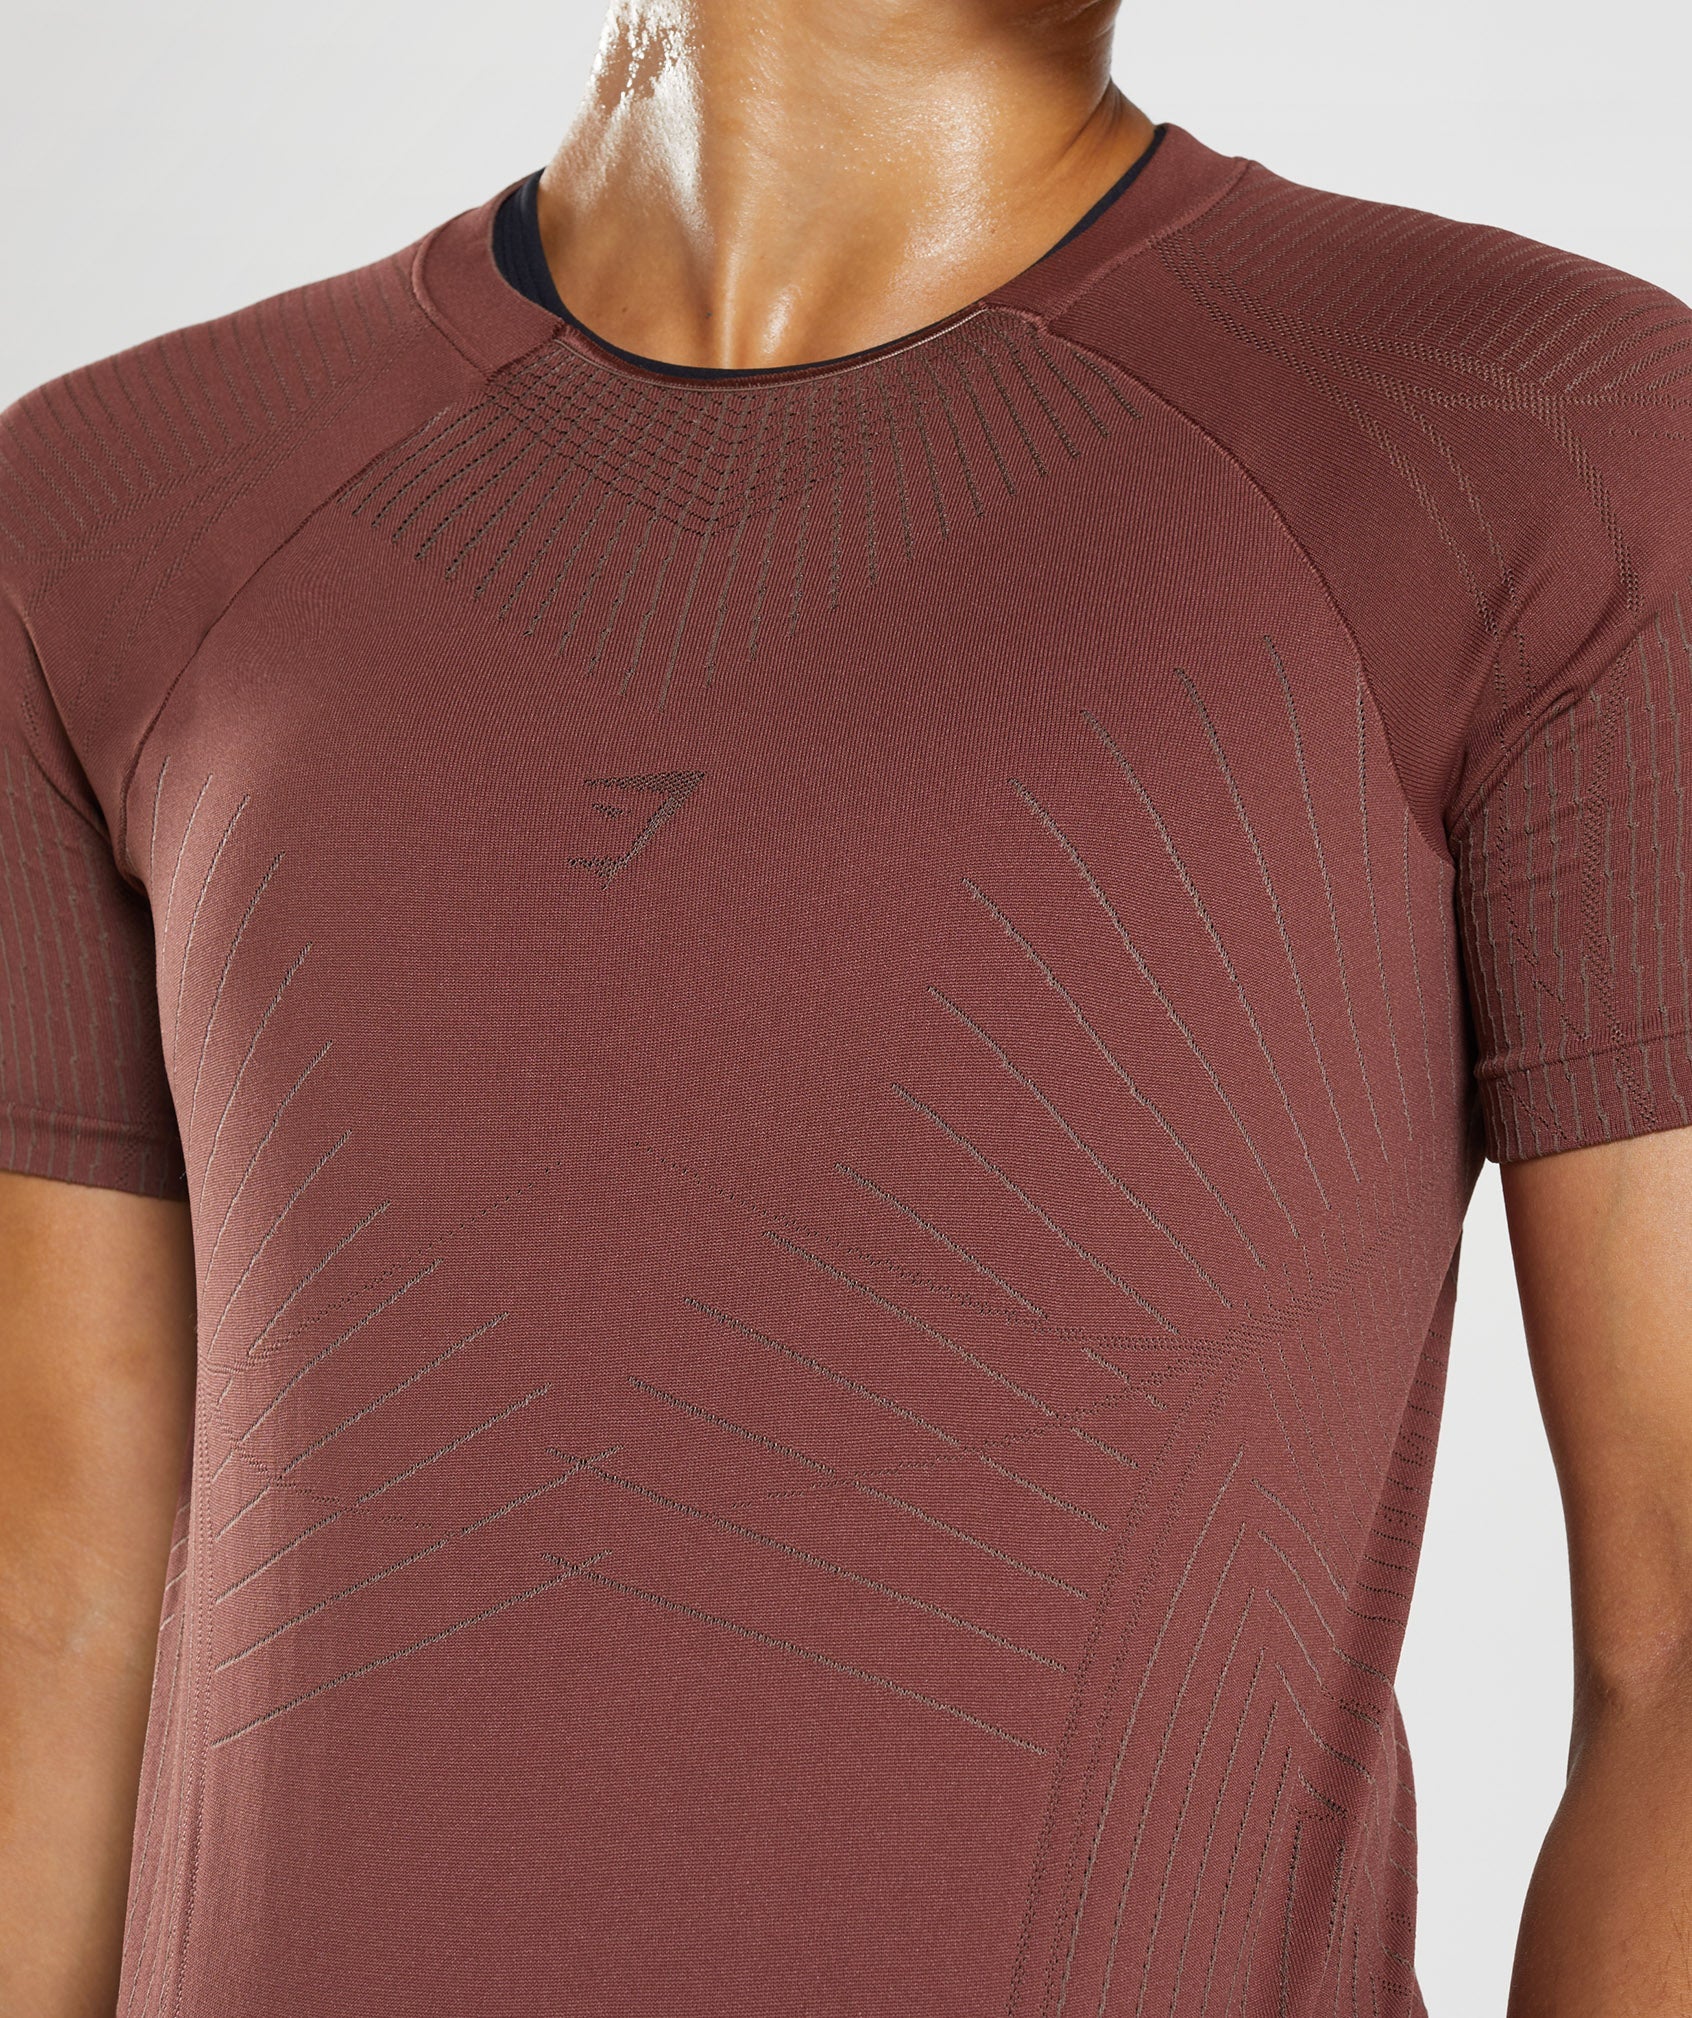 Apex Seamless Top in Cherry Brown/Truffle Brown - view 6